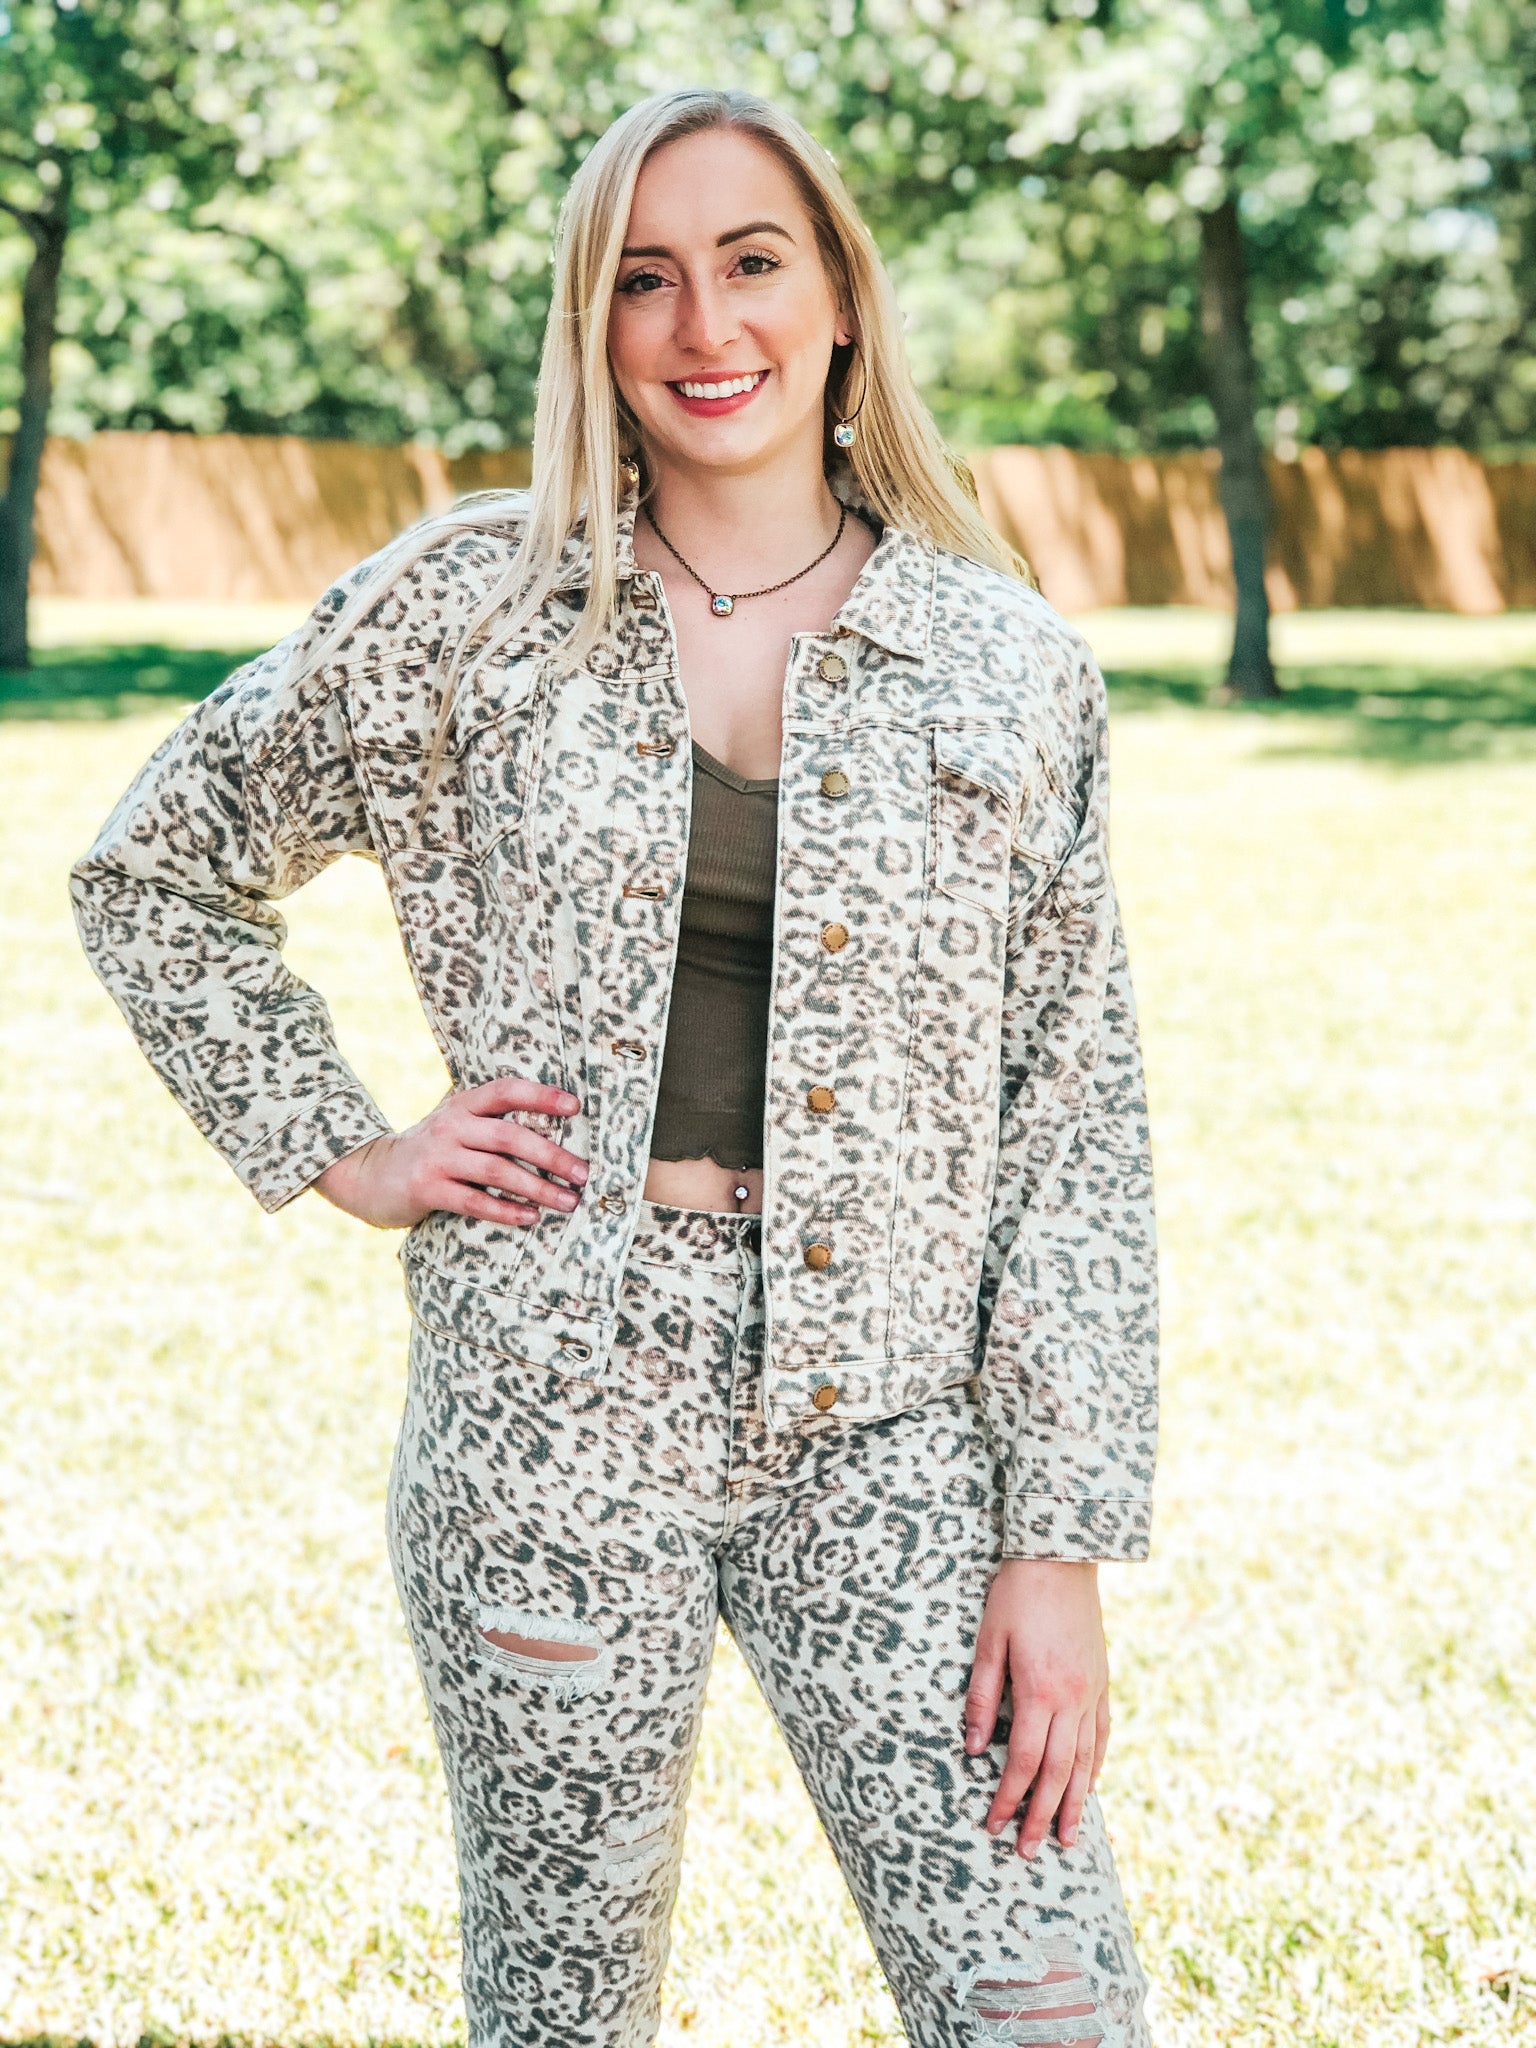 On The Upward Denim Button Up Jacket in Leopard - Giddy Up Glamour Boutique